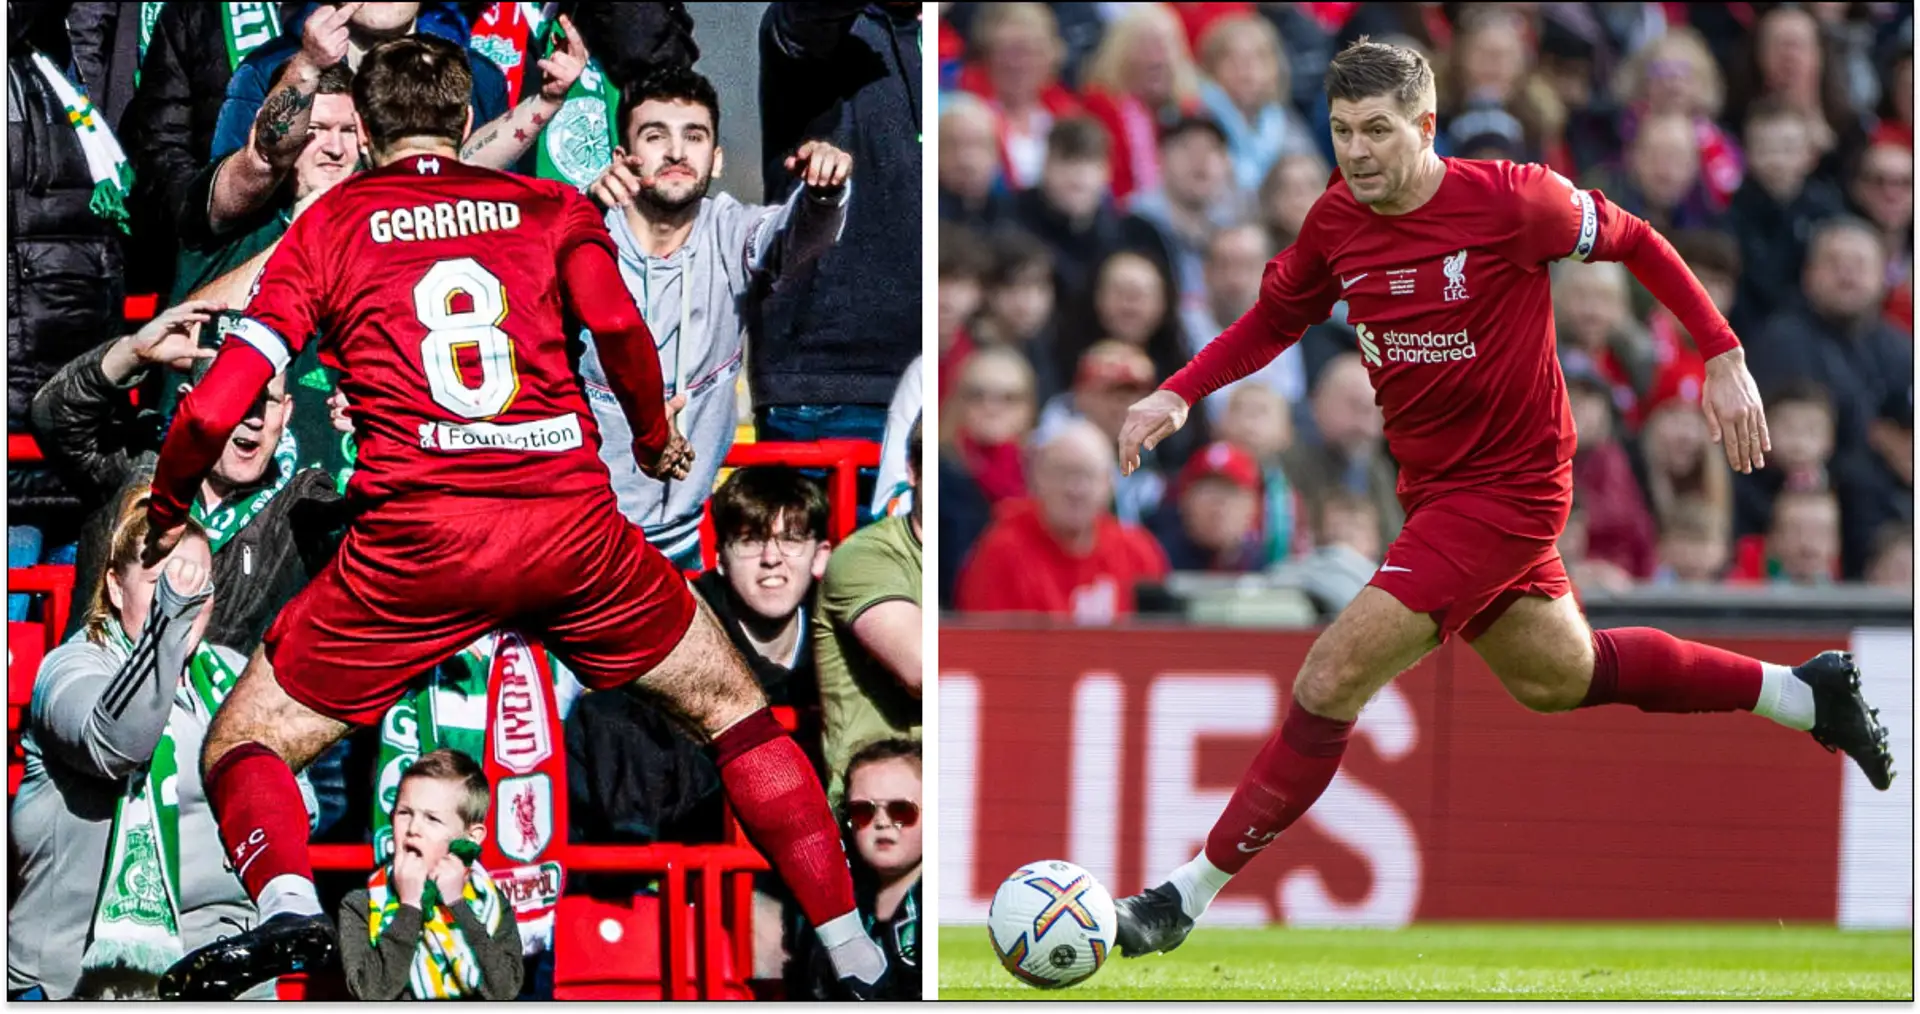 Gerrard celebrates in front of booing Celtic fans as Liverpool Legends win 2-0 (video)